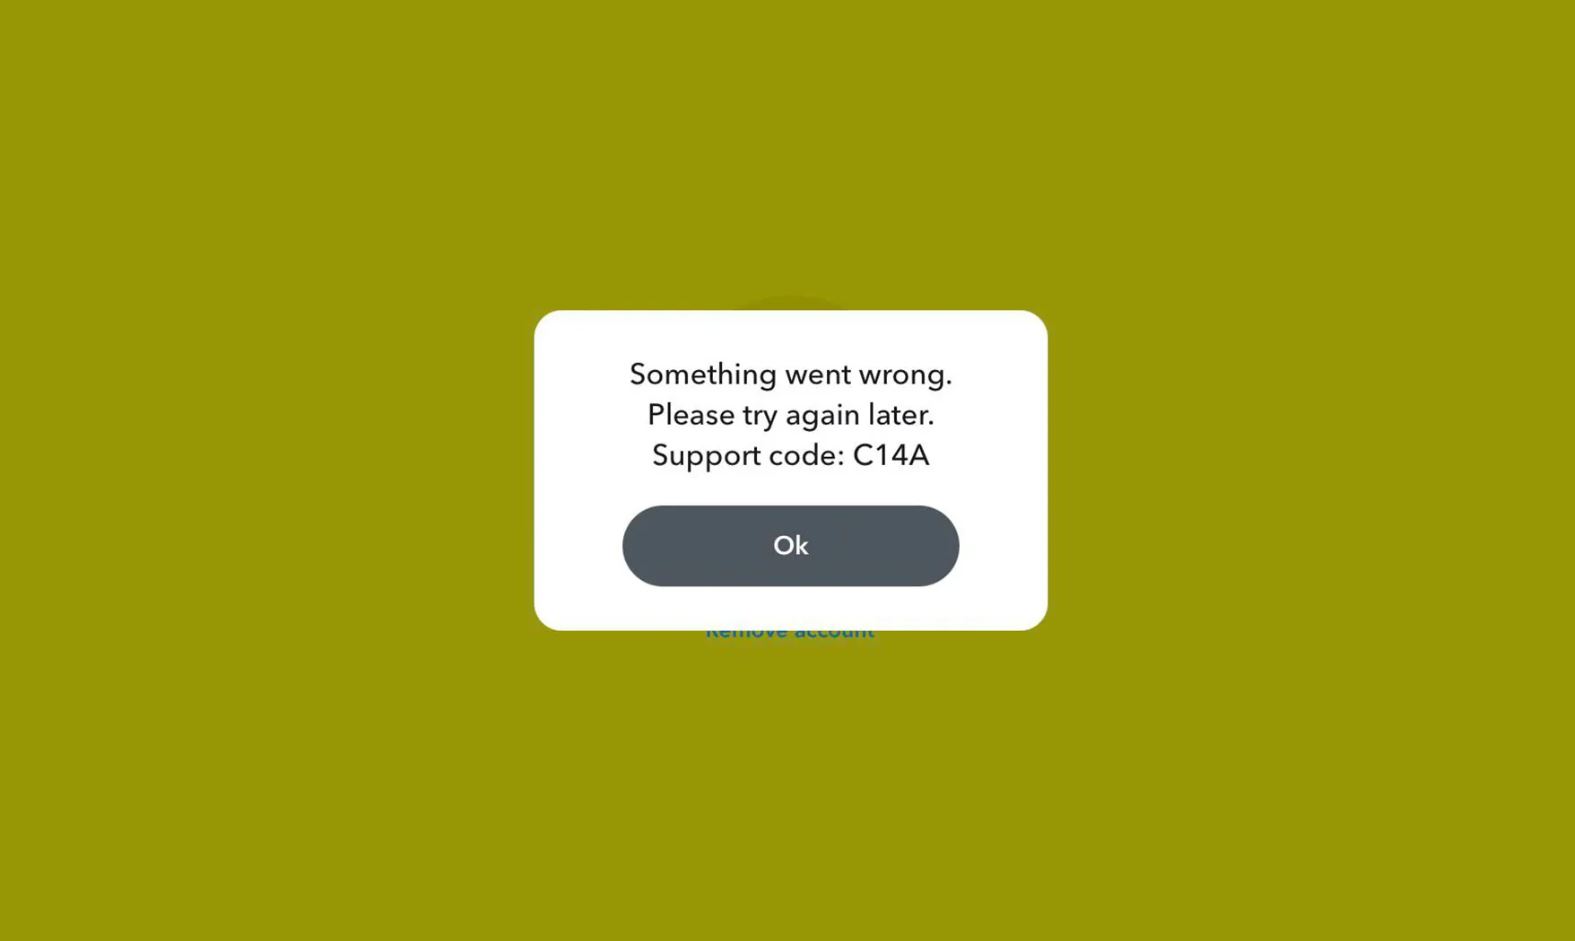 snapchat support code c14a